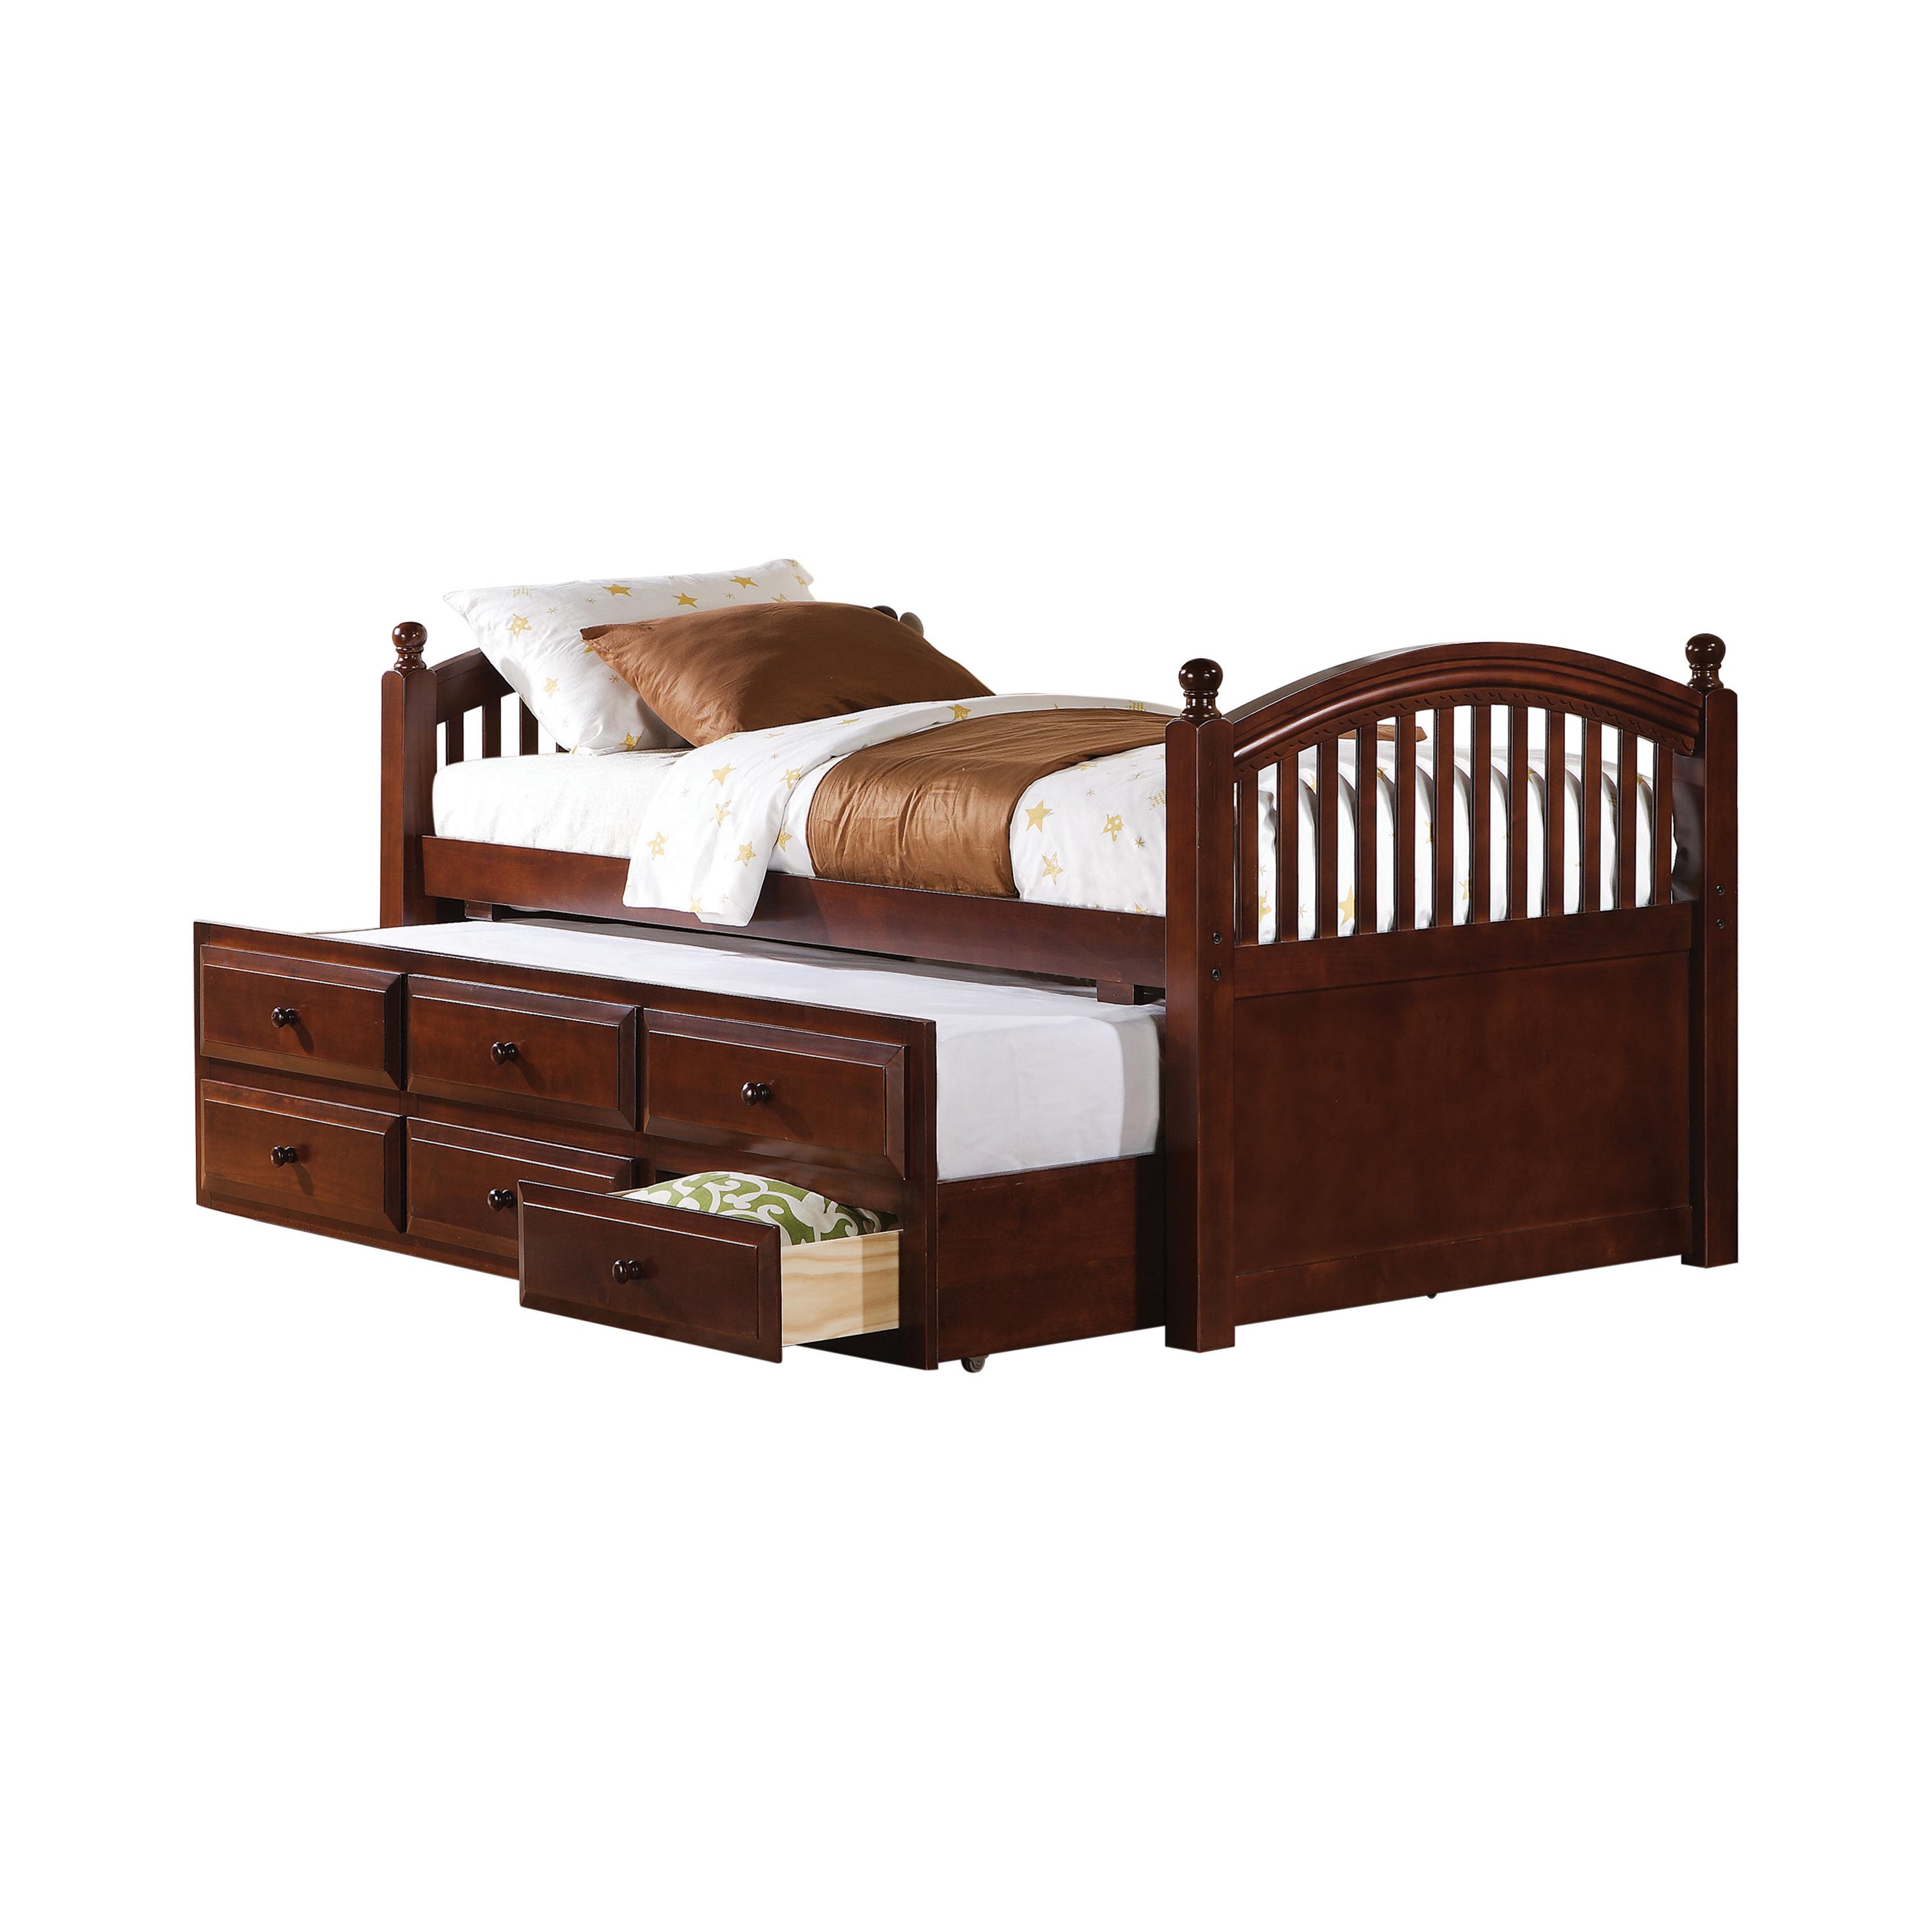 Transitional Captain's Bed w/Trundle 400381T 400381T in Chestnut 